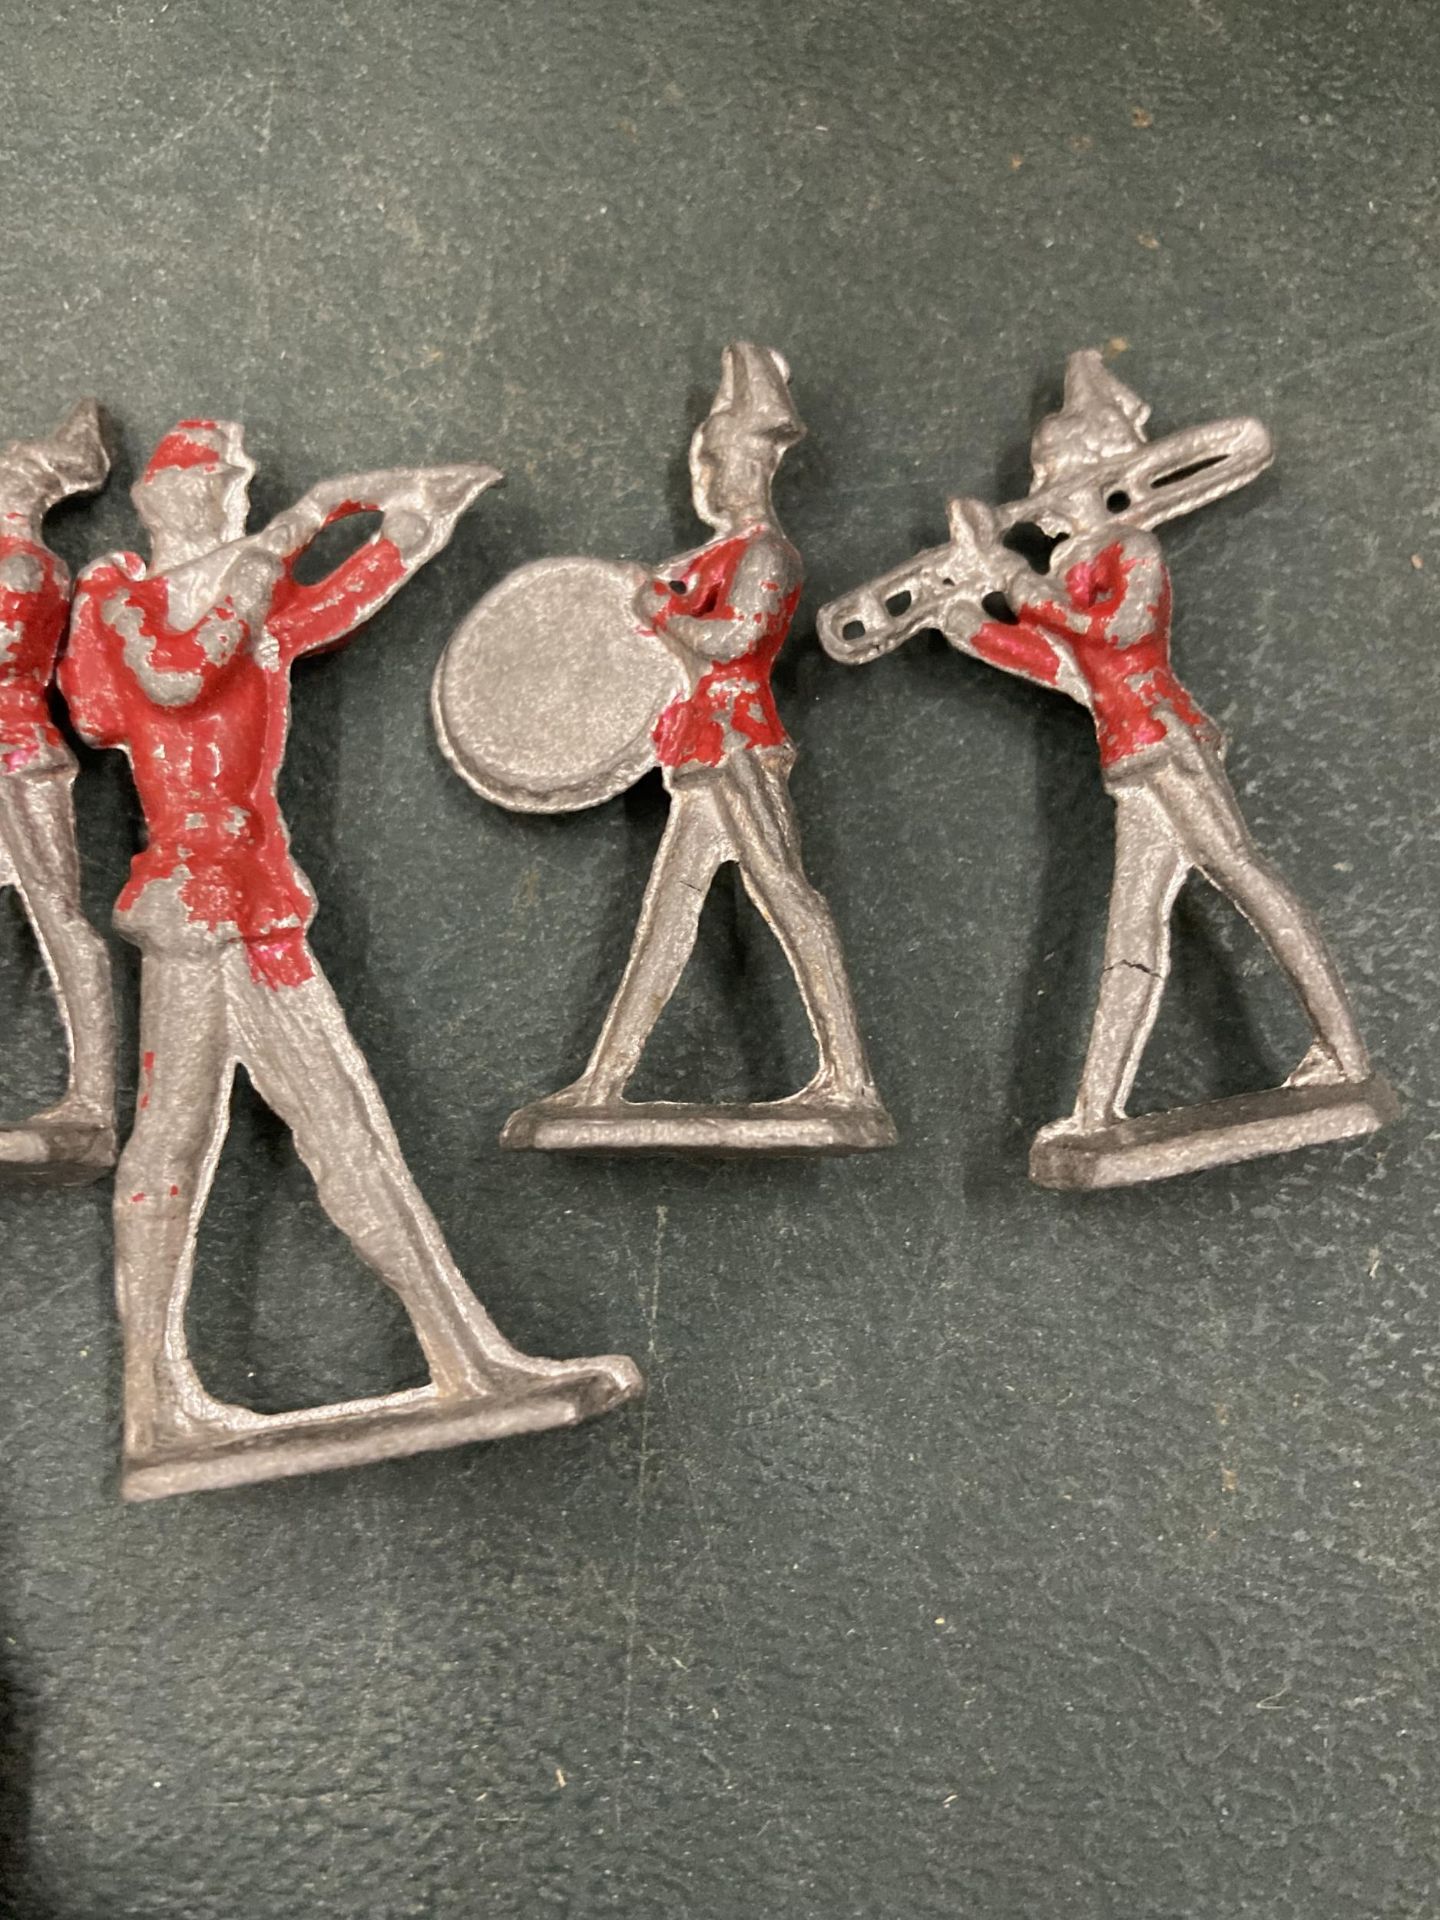 A VINTAGE 12 PIECE LEAD REDCOAT BRASS BAND - Image 5 of 5